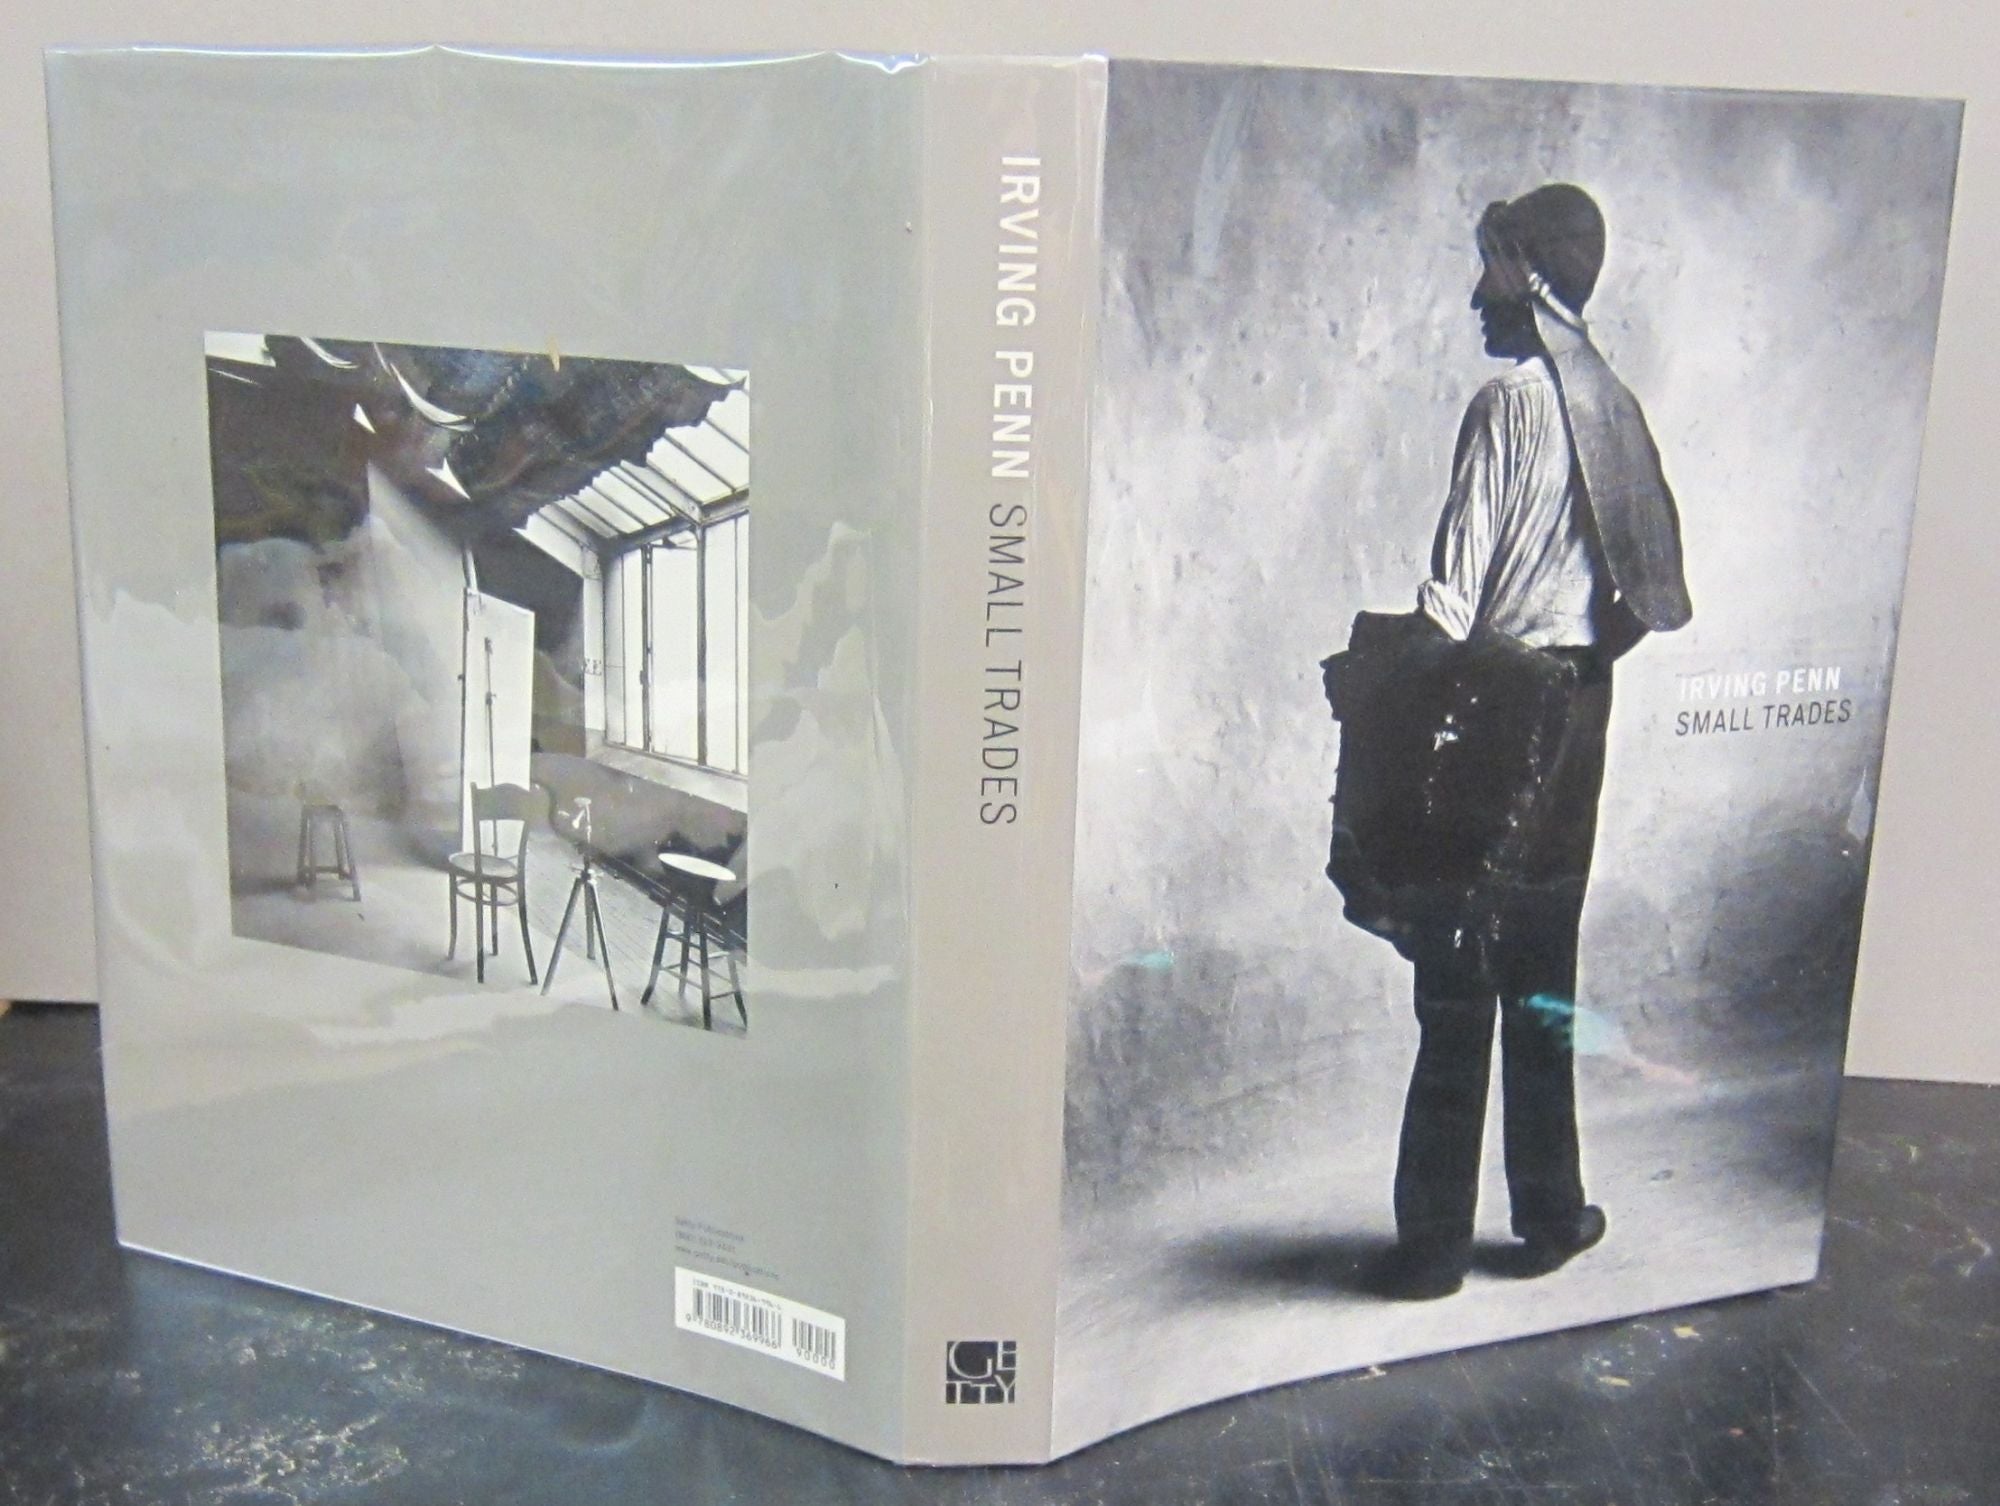 Irving Penn: Small Trades by Virginia, Anne Heckert Lacoste on Midway Book  Store